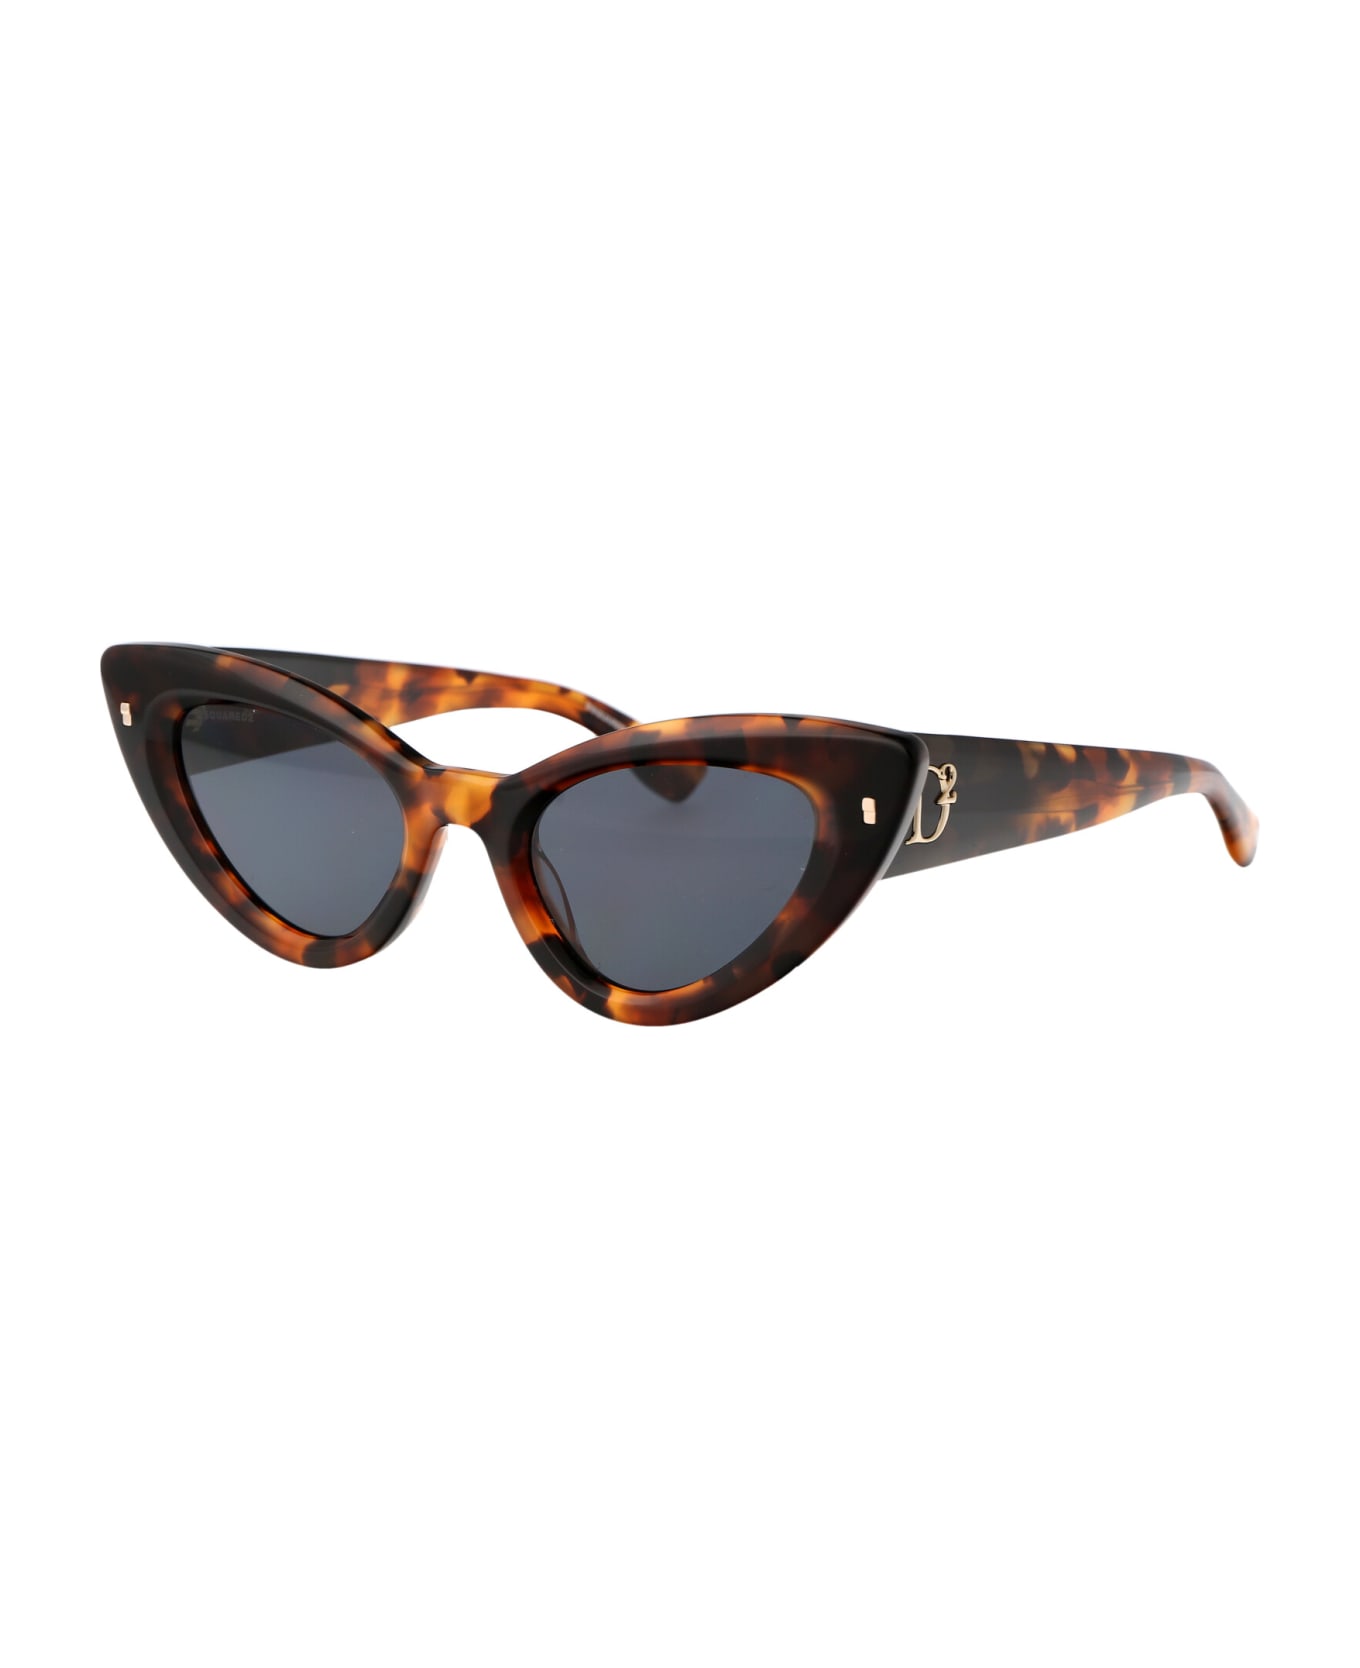 Dsquared2 Eyewear D2 0092/s Sunglasses - HAWKERS Diamond CLASSIC ROUNDED Sunglasses for Men and Women UV400